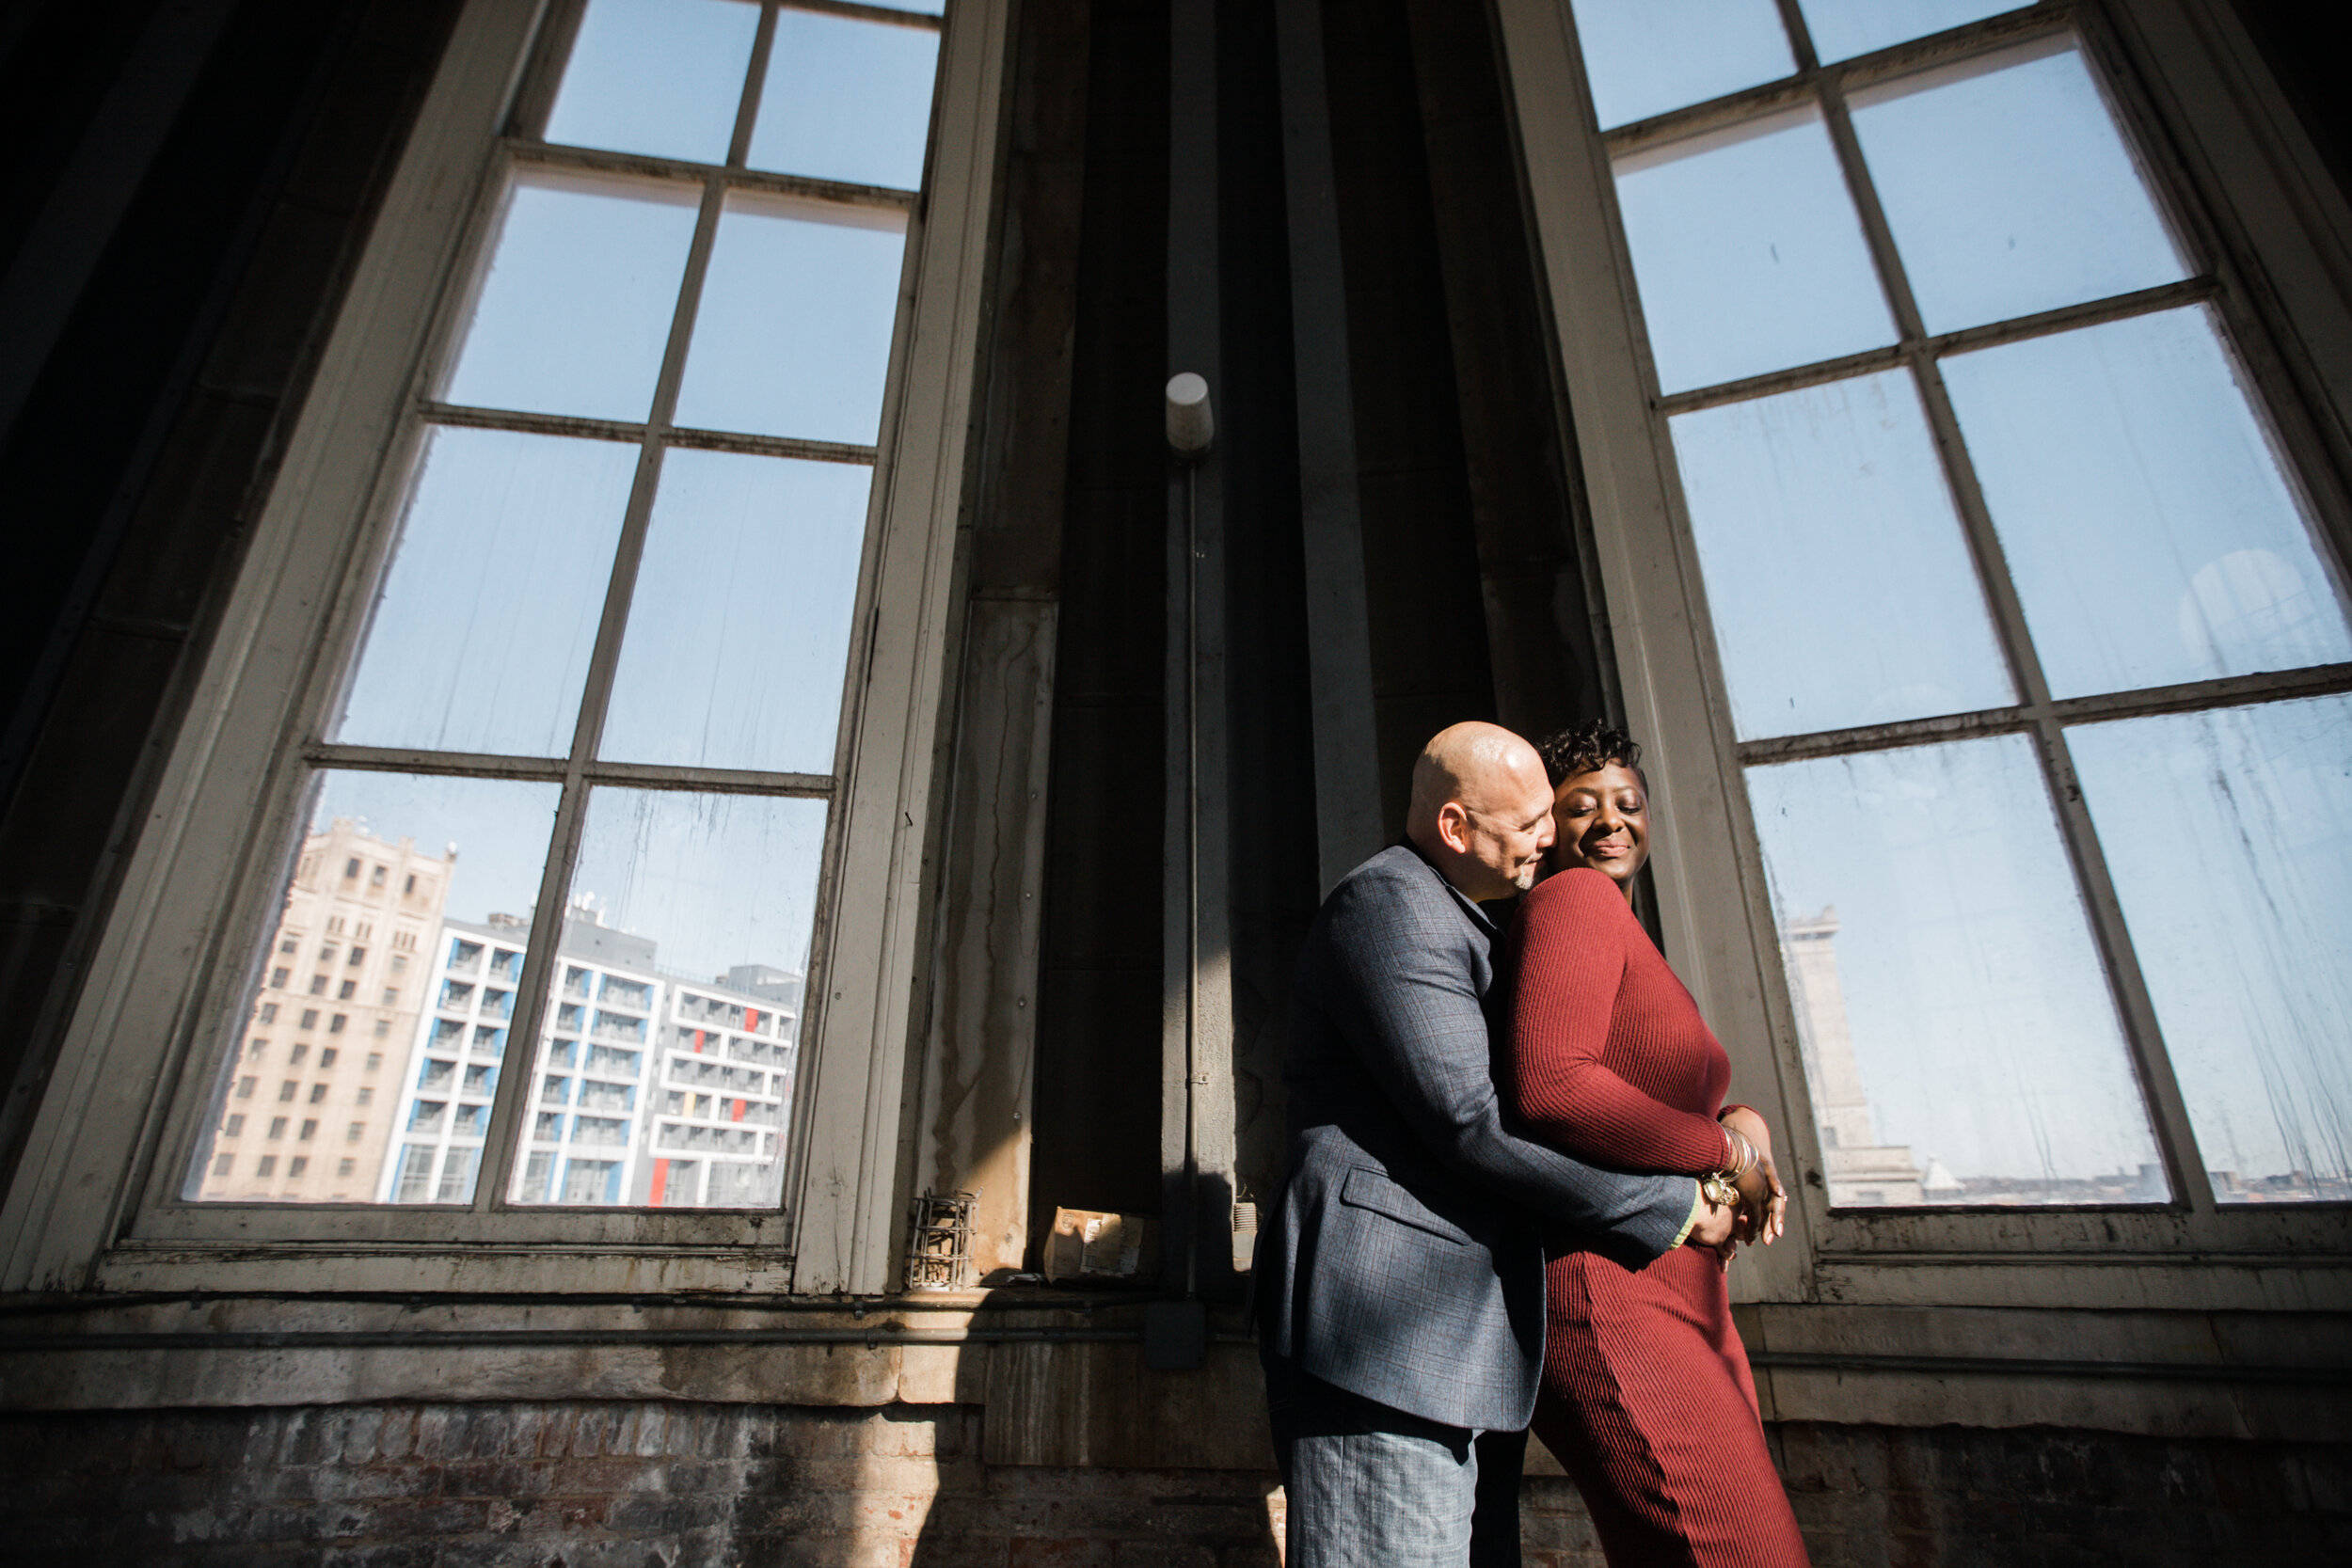 Beautiful Engagement Session at Baltimore City Hall by Baltimores Best Wedding Photographers Megapixels Media Black Wedding Photographers-33.jpg